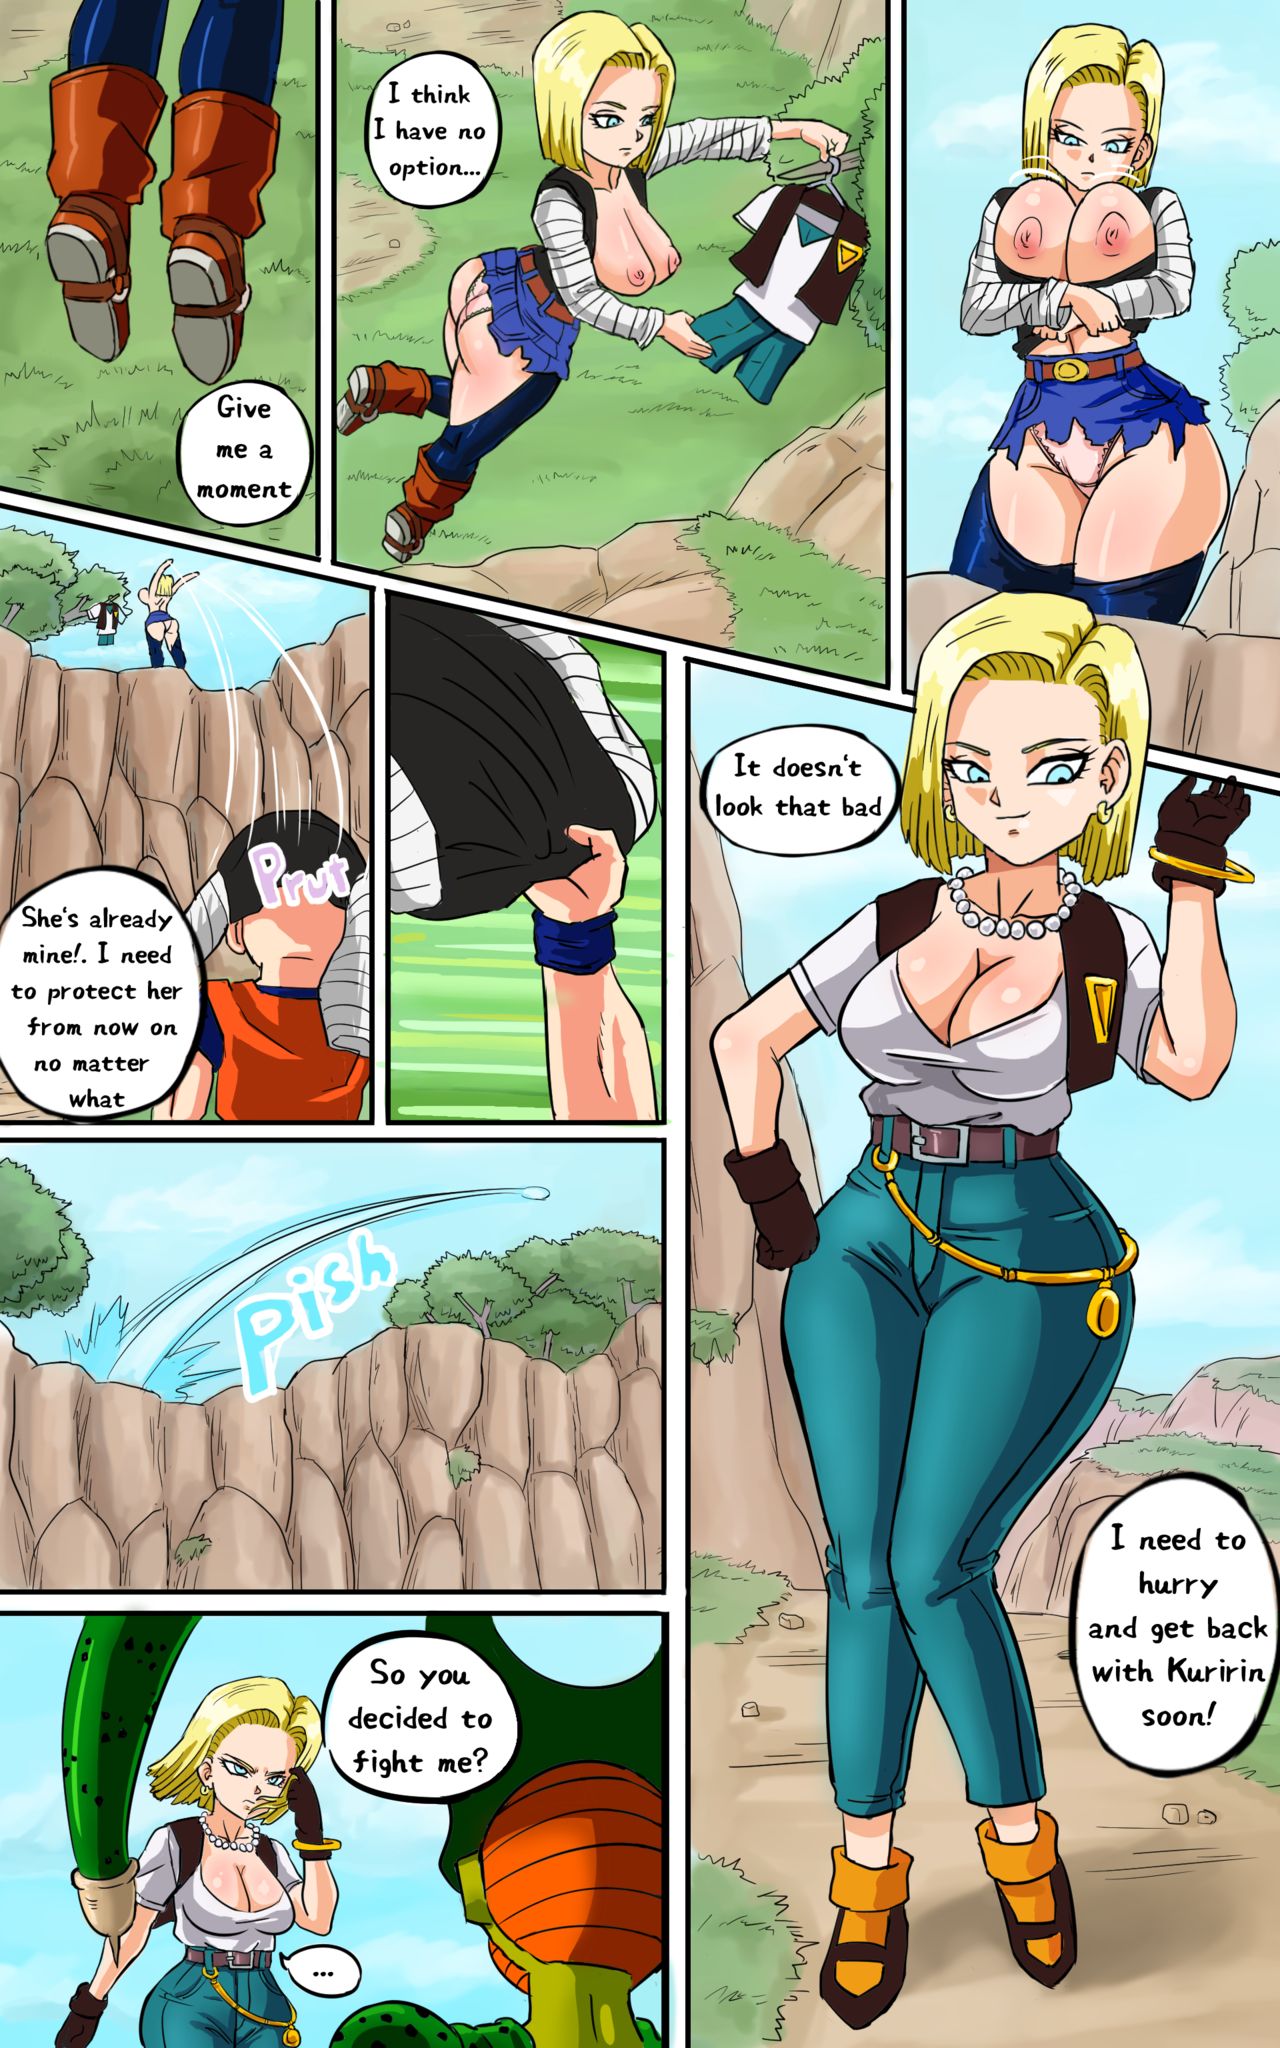 Android 18 meets Krillin Pink Pawg 06